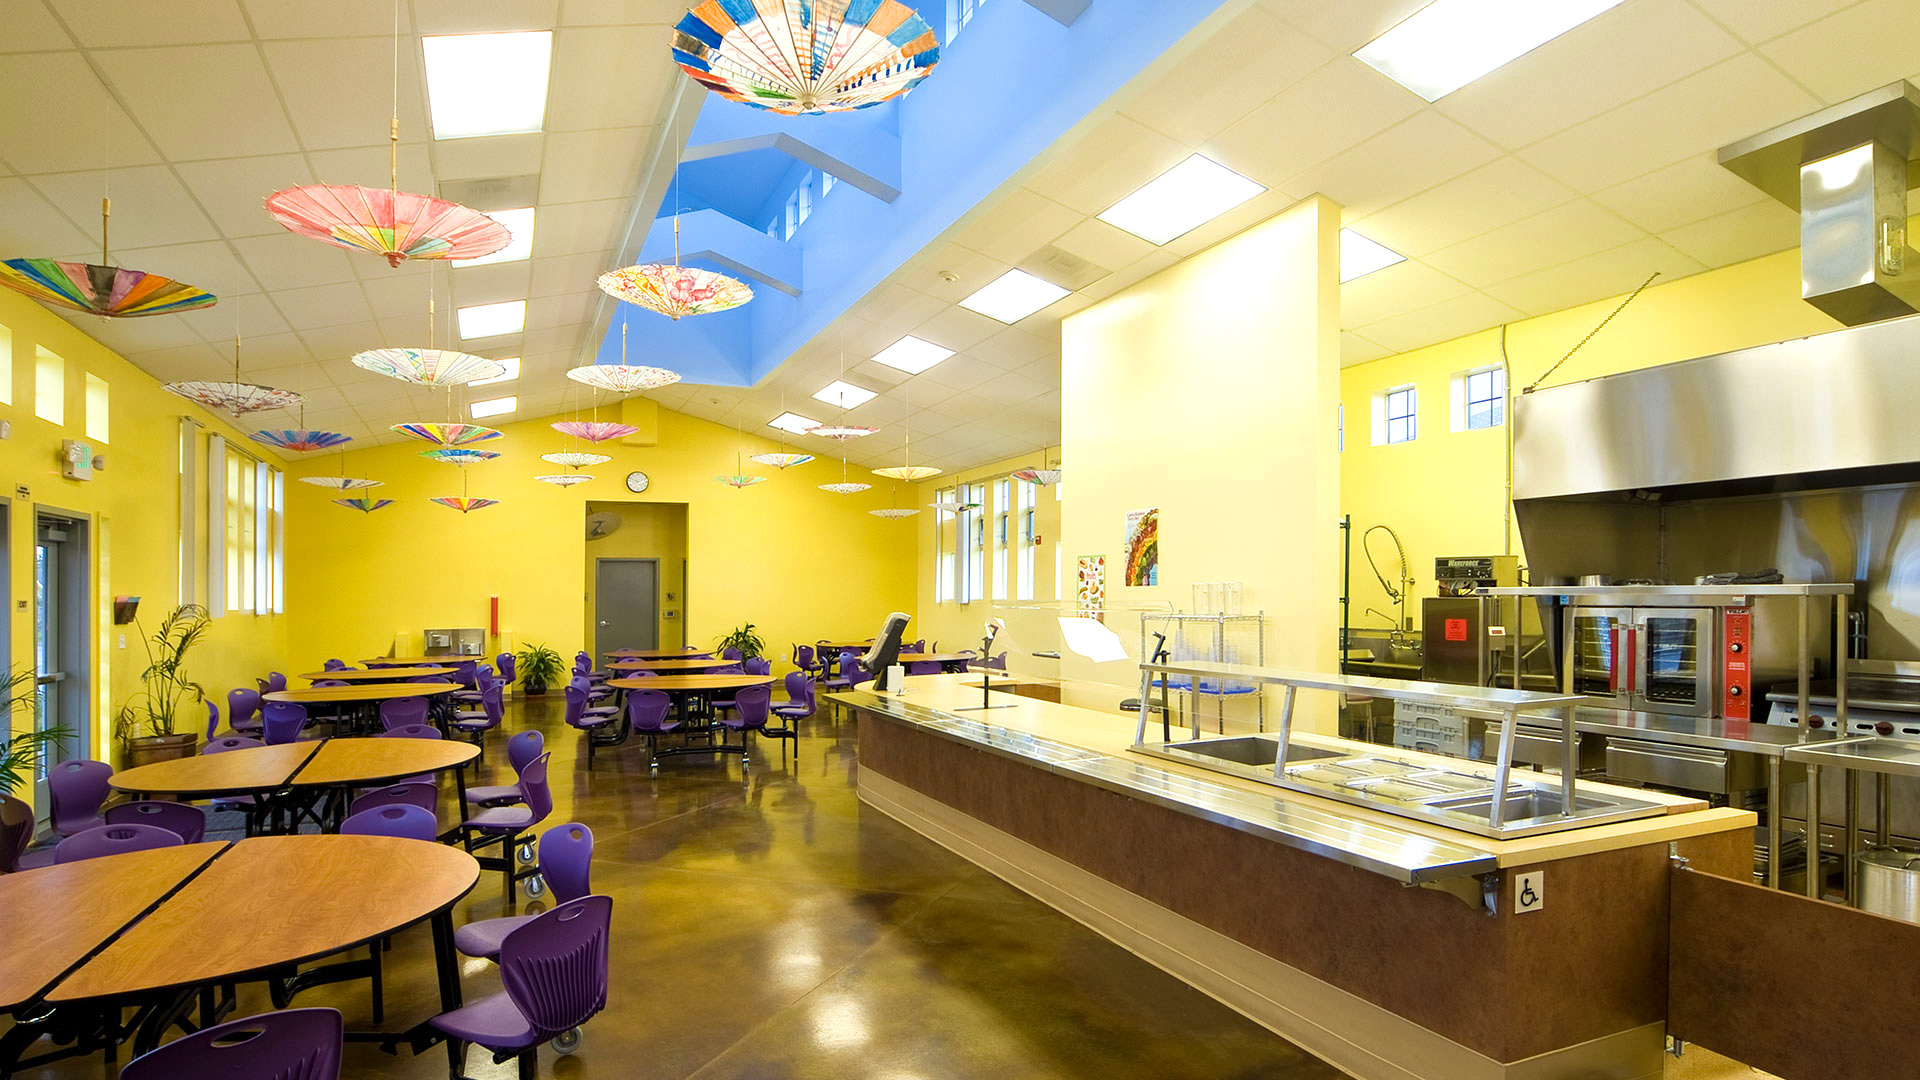 Interior of cafeteria, highlighting on serving area. Fun umbrellas hang from the ceiling for artsy effect.